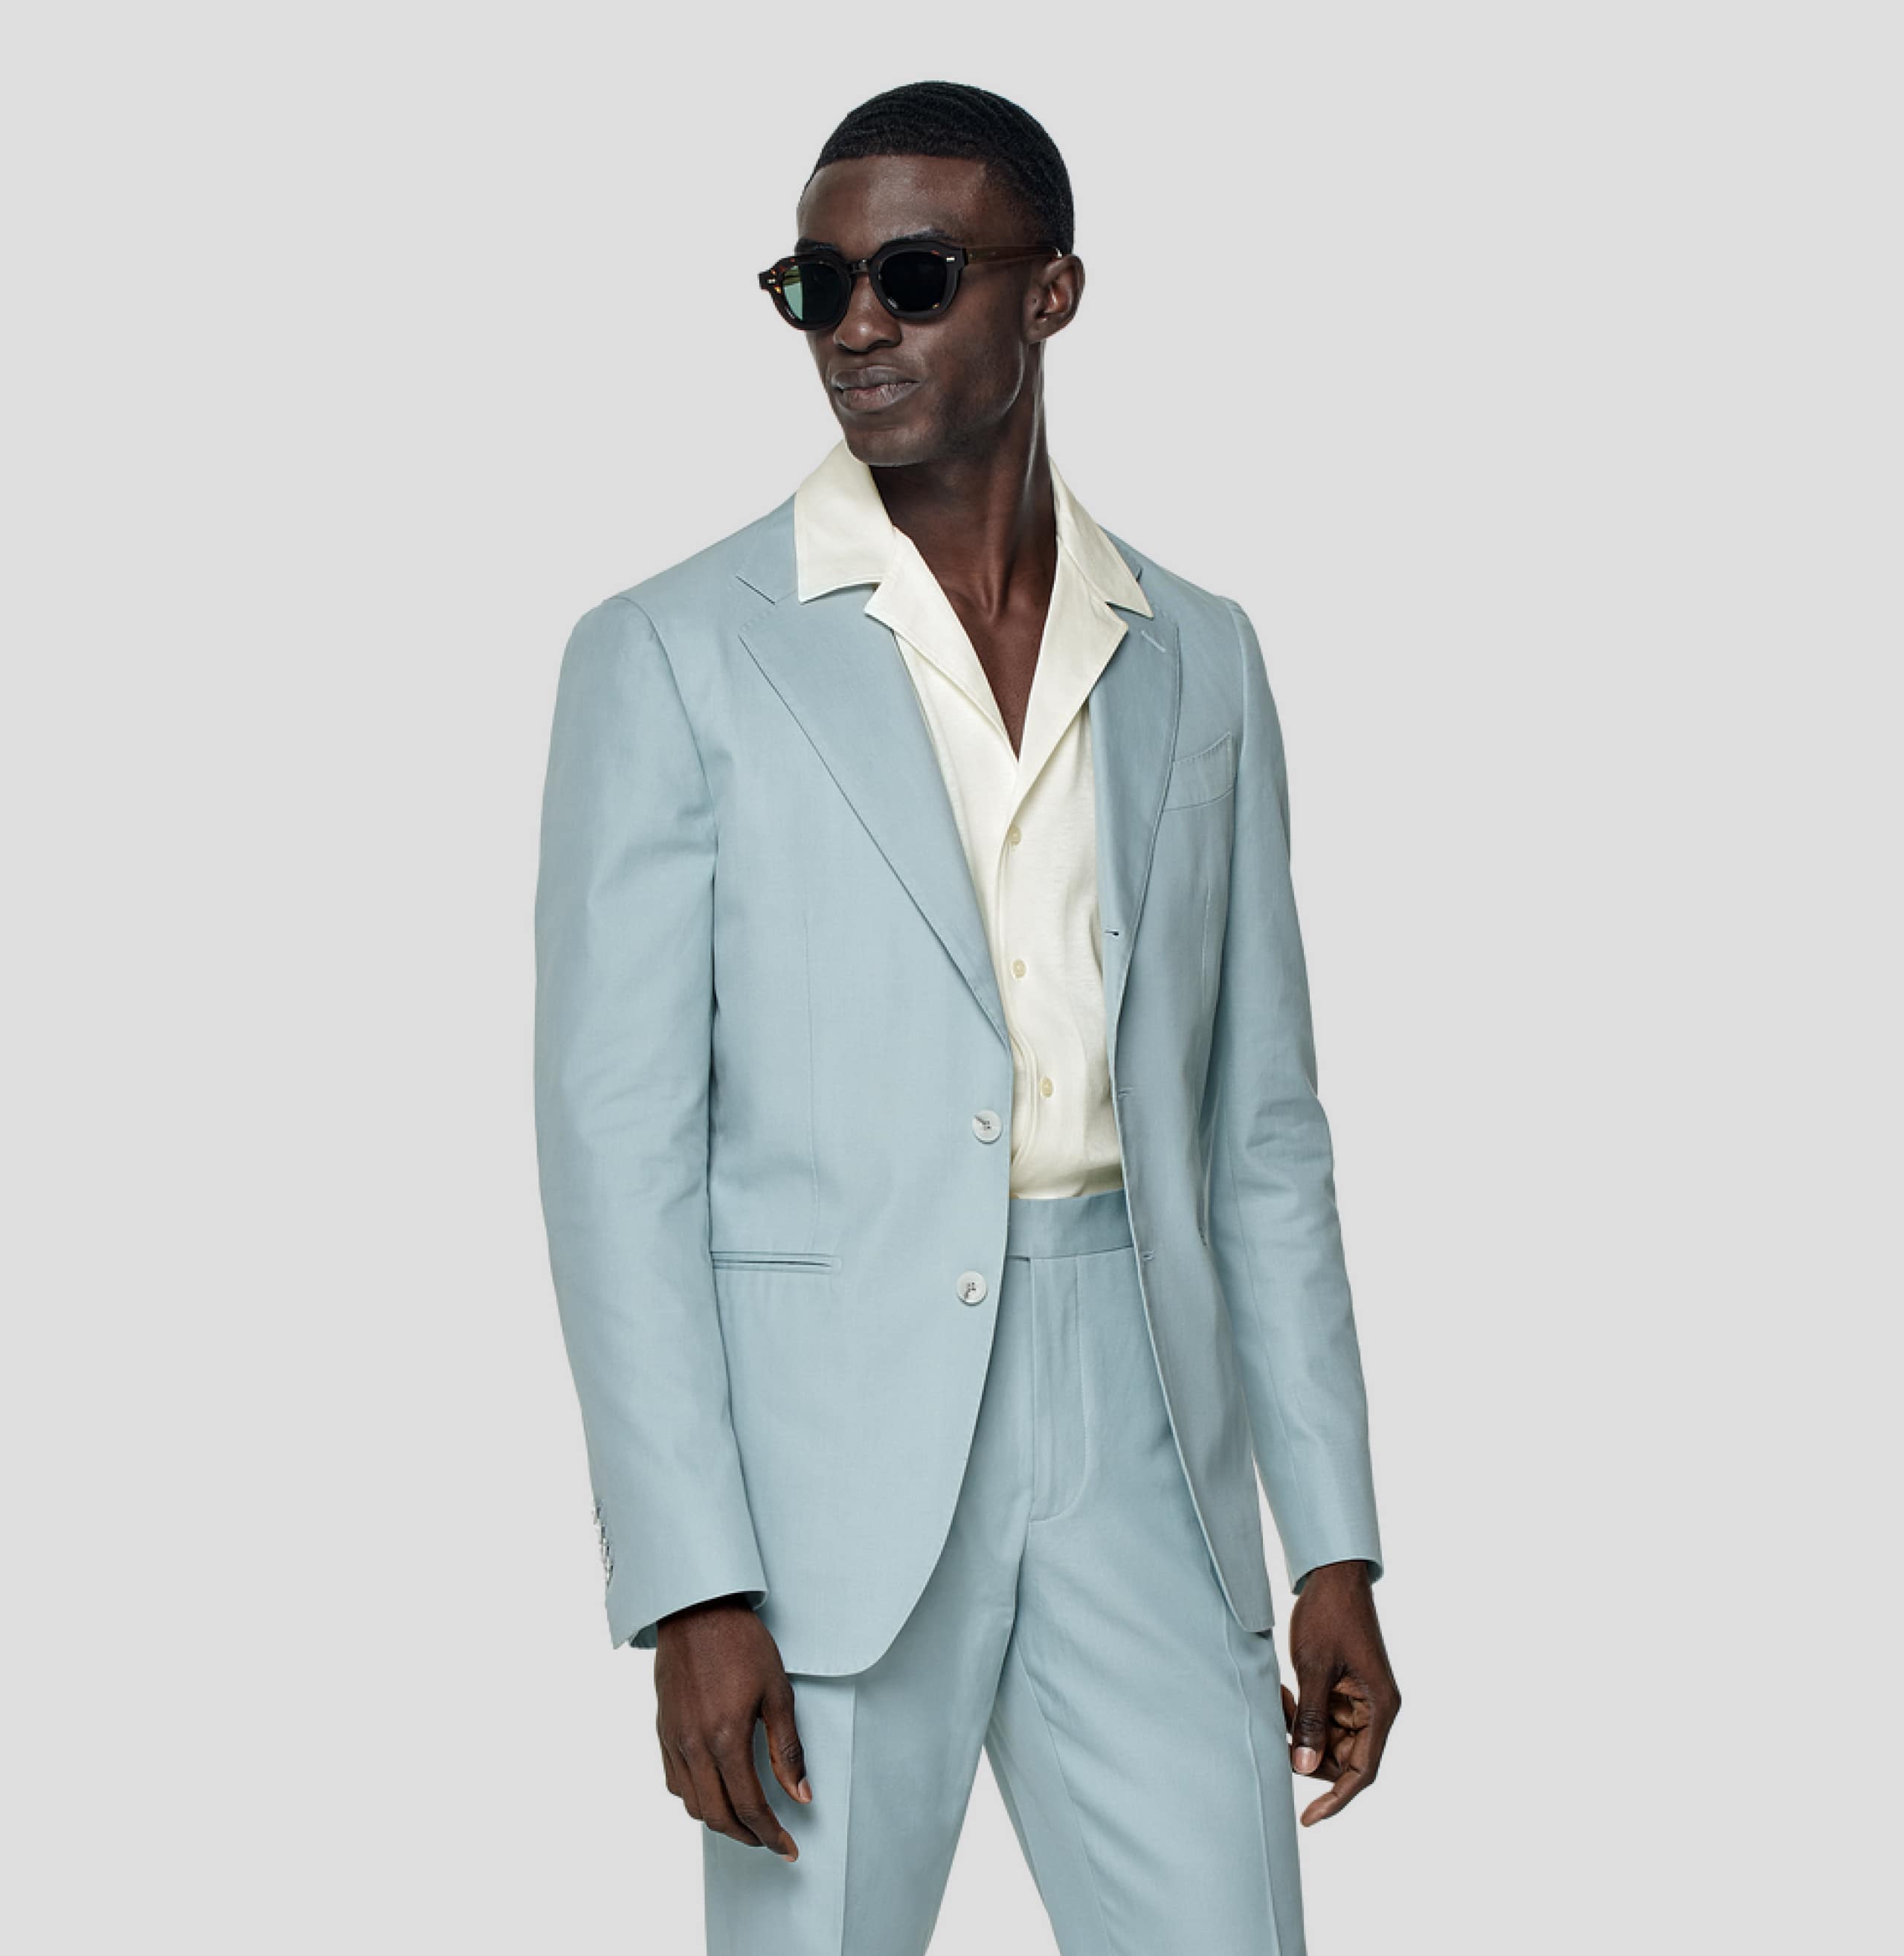 Men’s Suits | Wedding, Formal & Custom Suits | SUITSUPPLY US